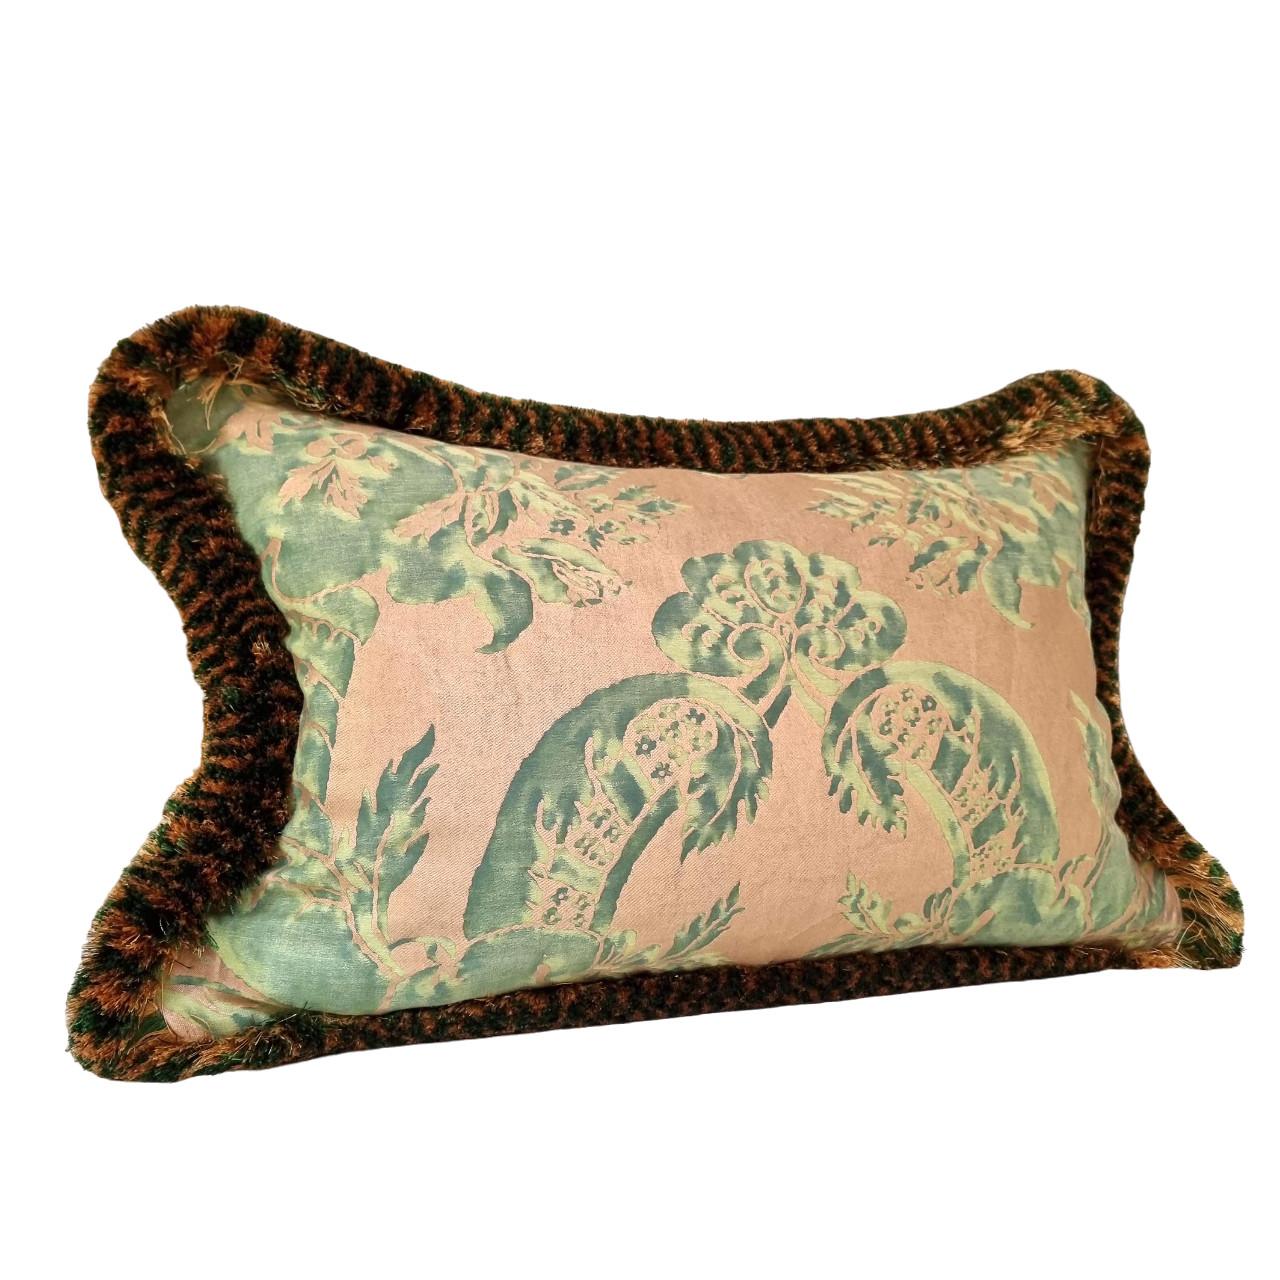 This amazing double-sided lumbar pillow is handmade using Fortuny fabric Olimpia pattern in green & silvery gold color.
The pillow is embellished all along the four edges with two-toned luxurious bullion fringe in green and gold color.
The pillow